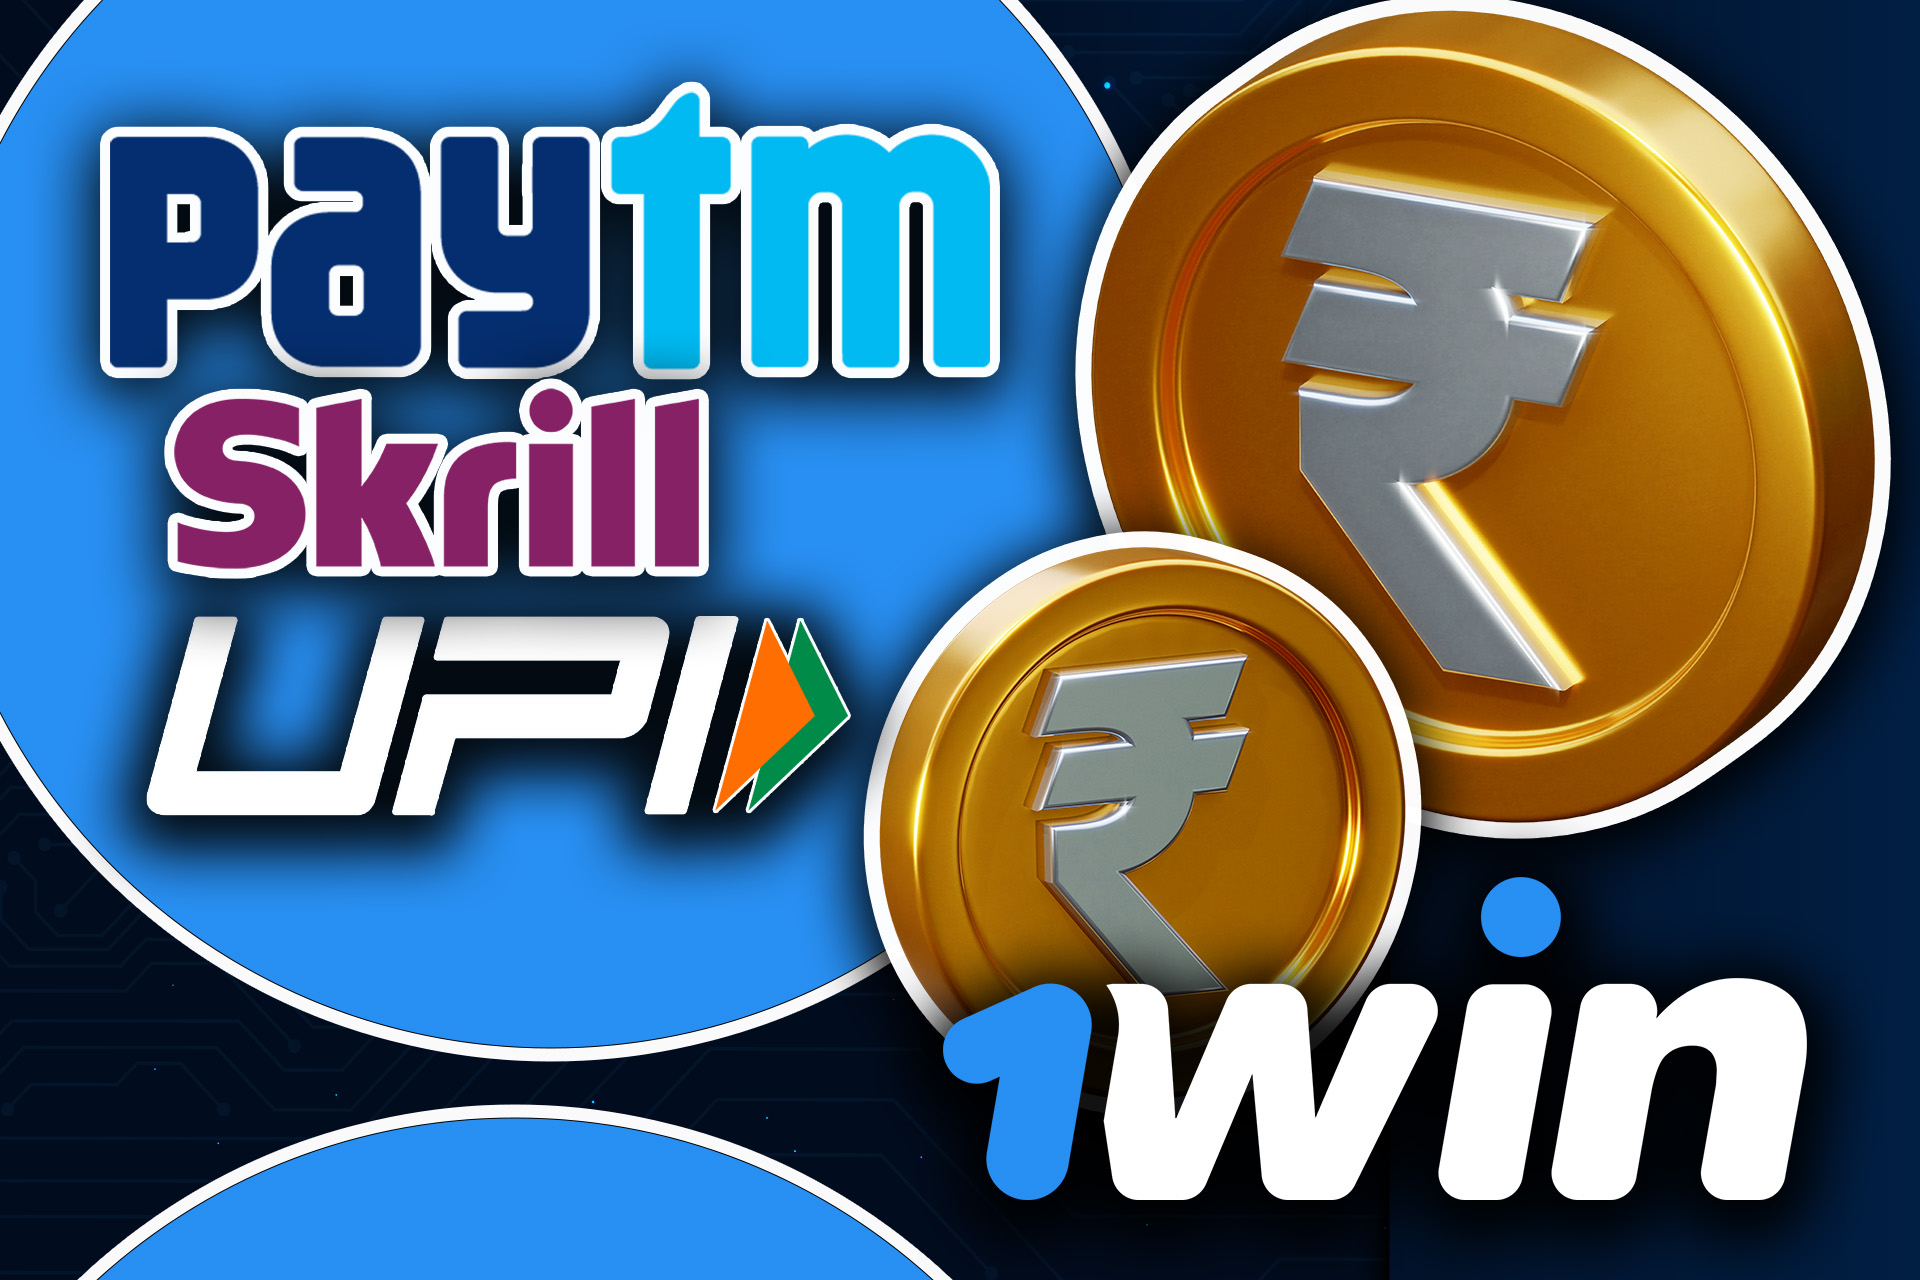 There are various payment methods to deposit 1win and play Lucky Jet on money.